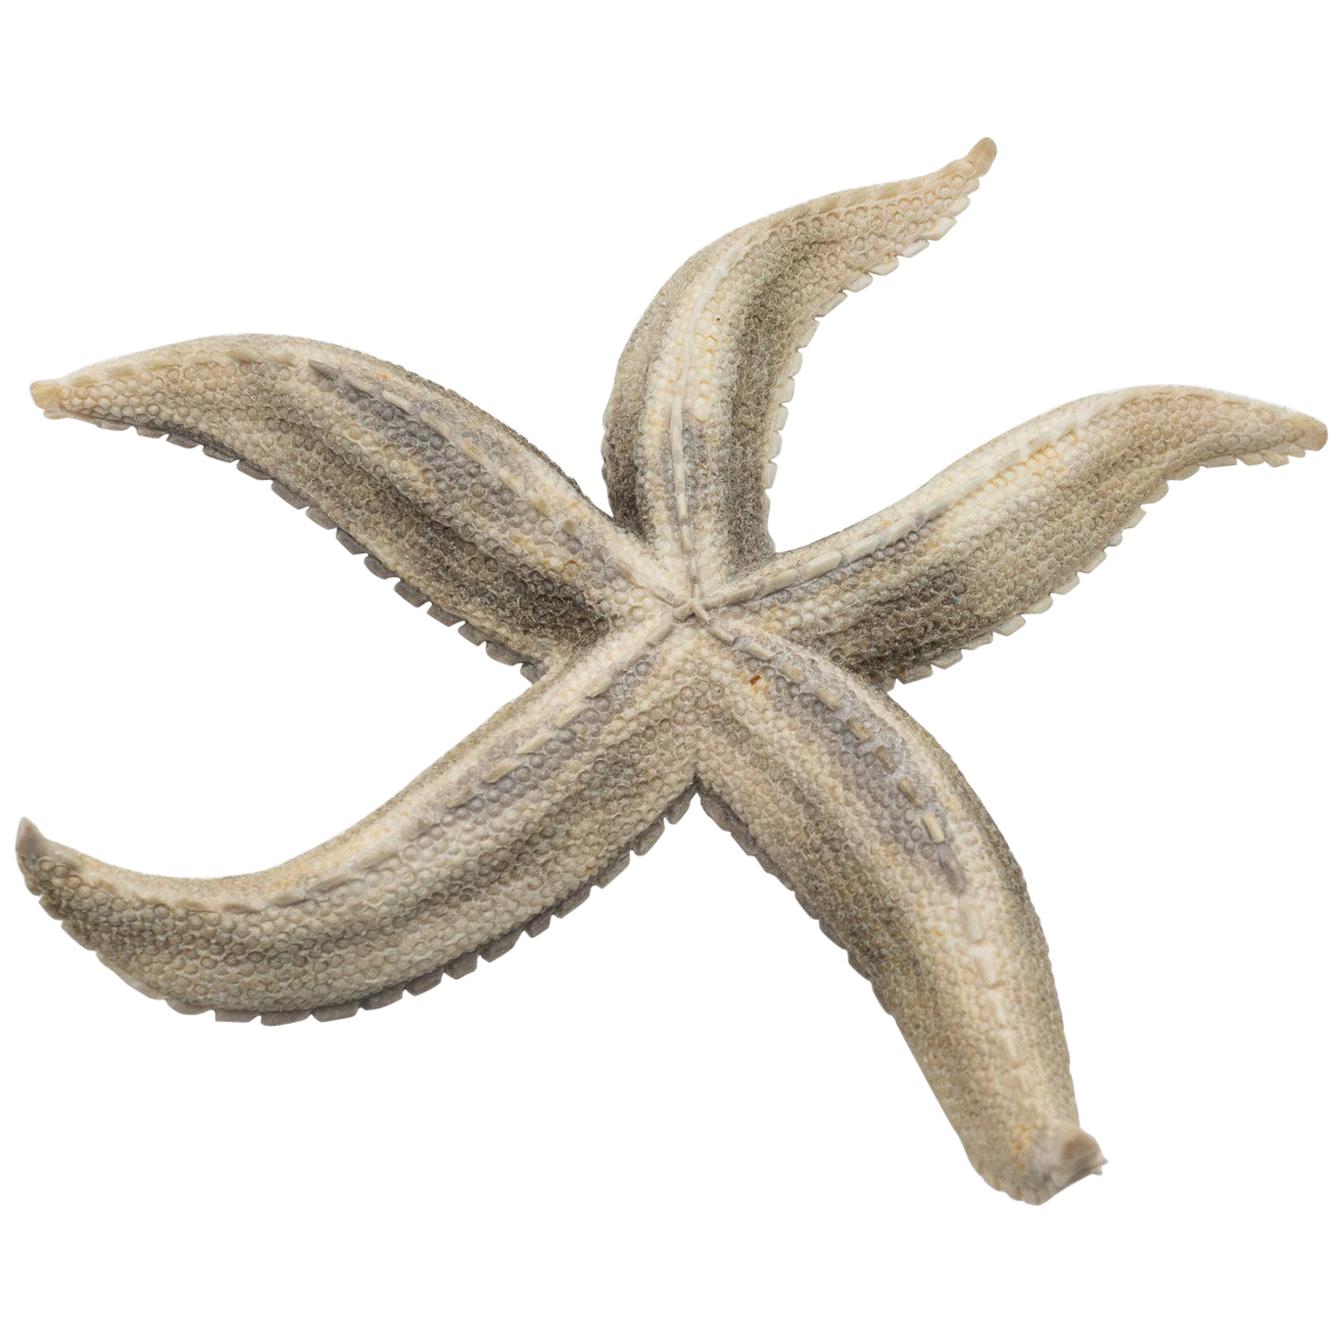 Large North American Moose Antler Carving of Starfish